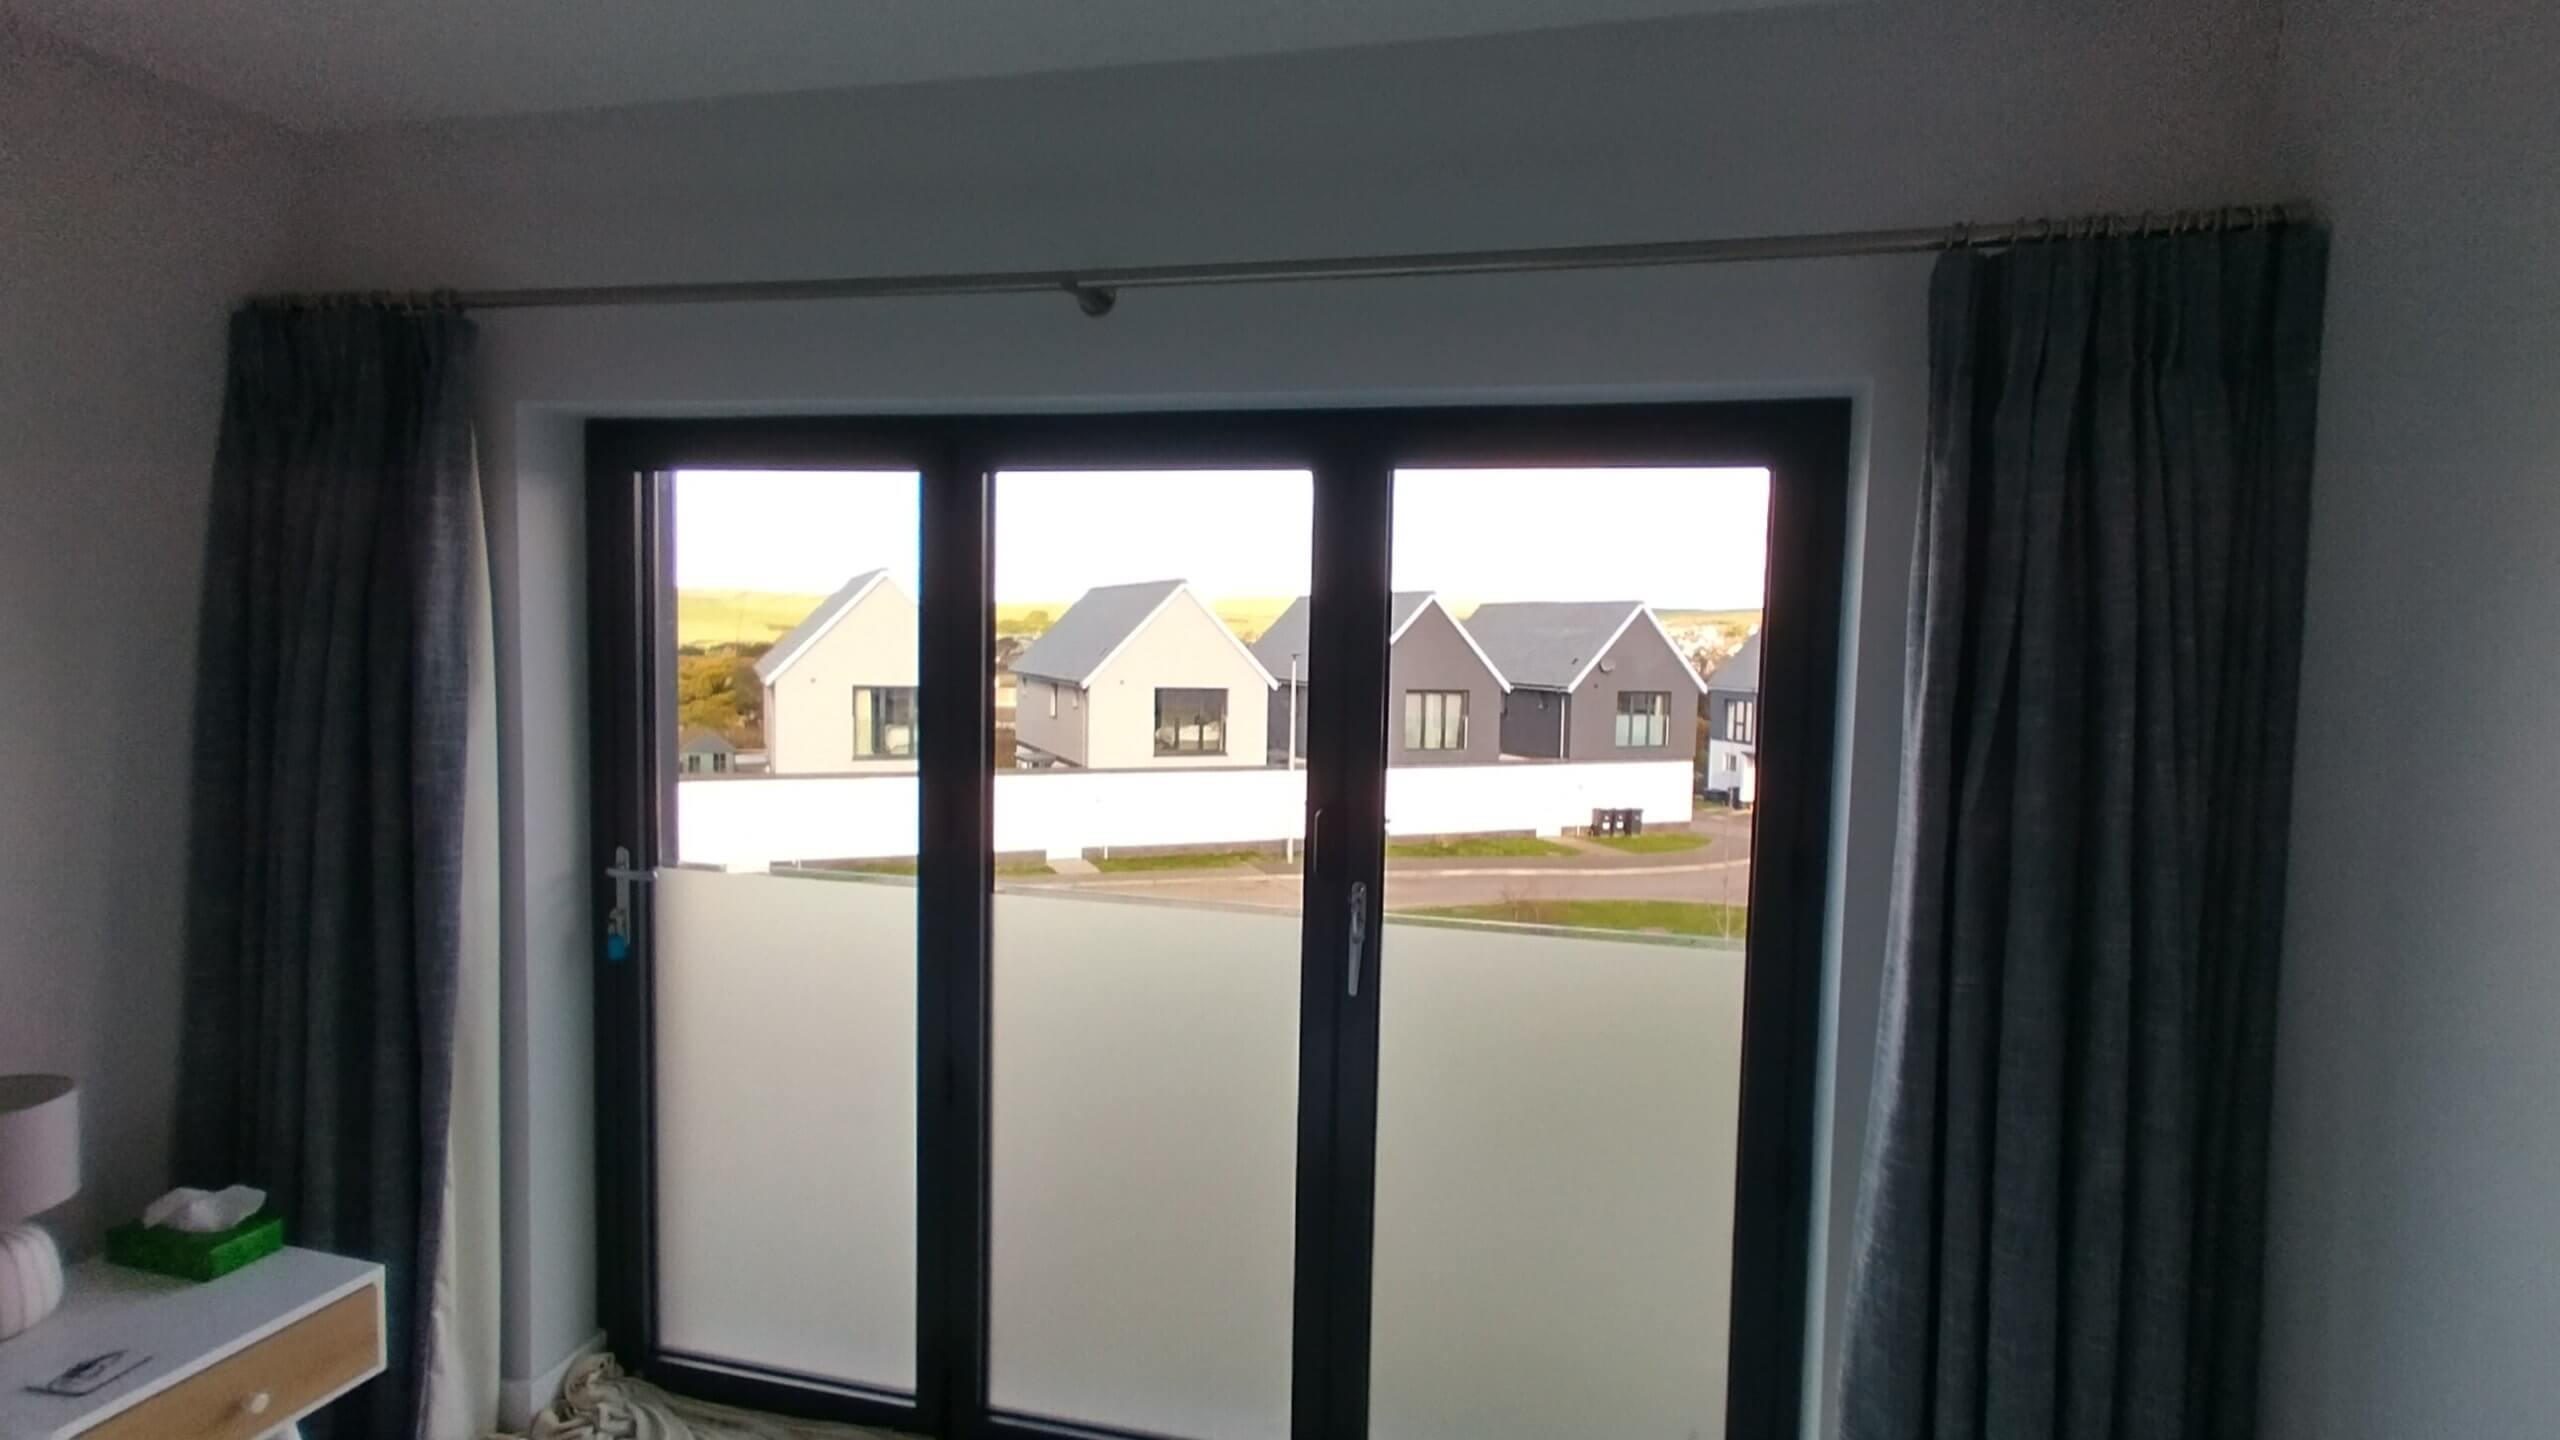 Application of a frosted window film to bifold doors to create privacy in the bedroom. Tinting Express Ltd